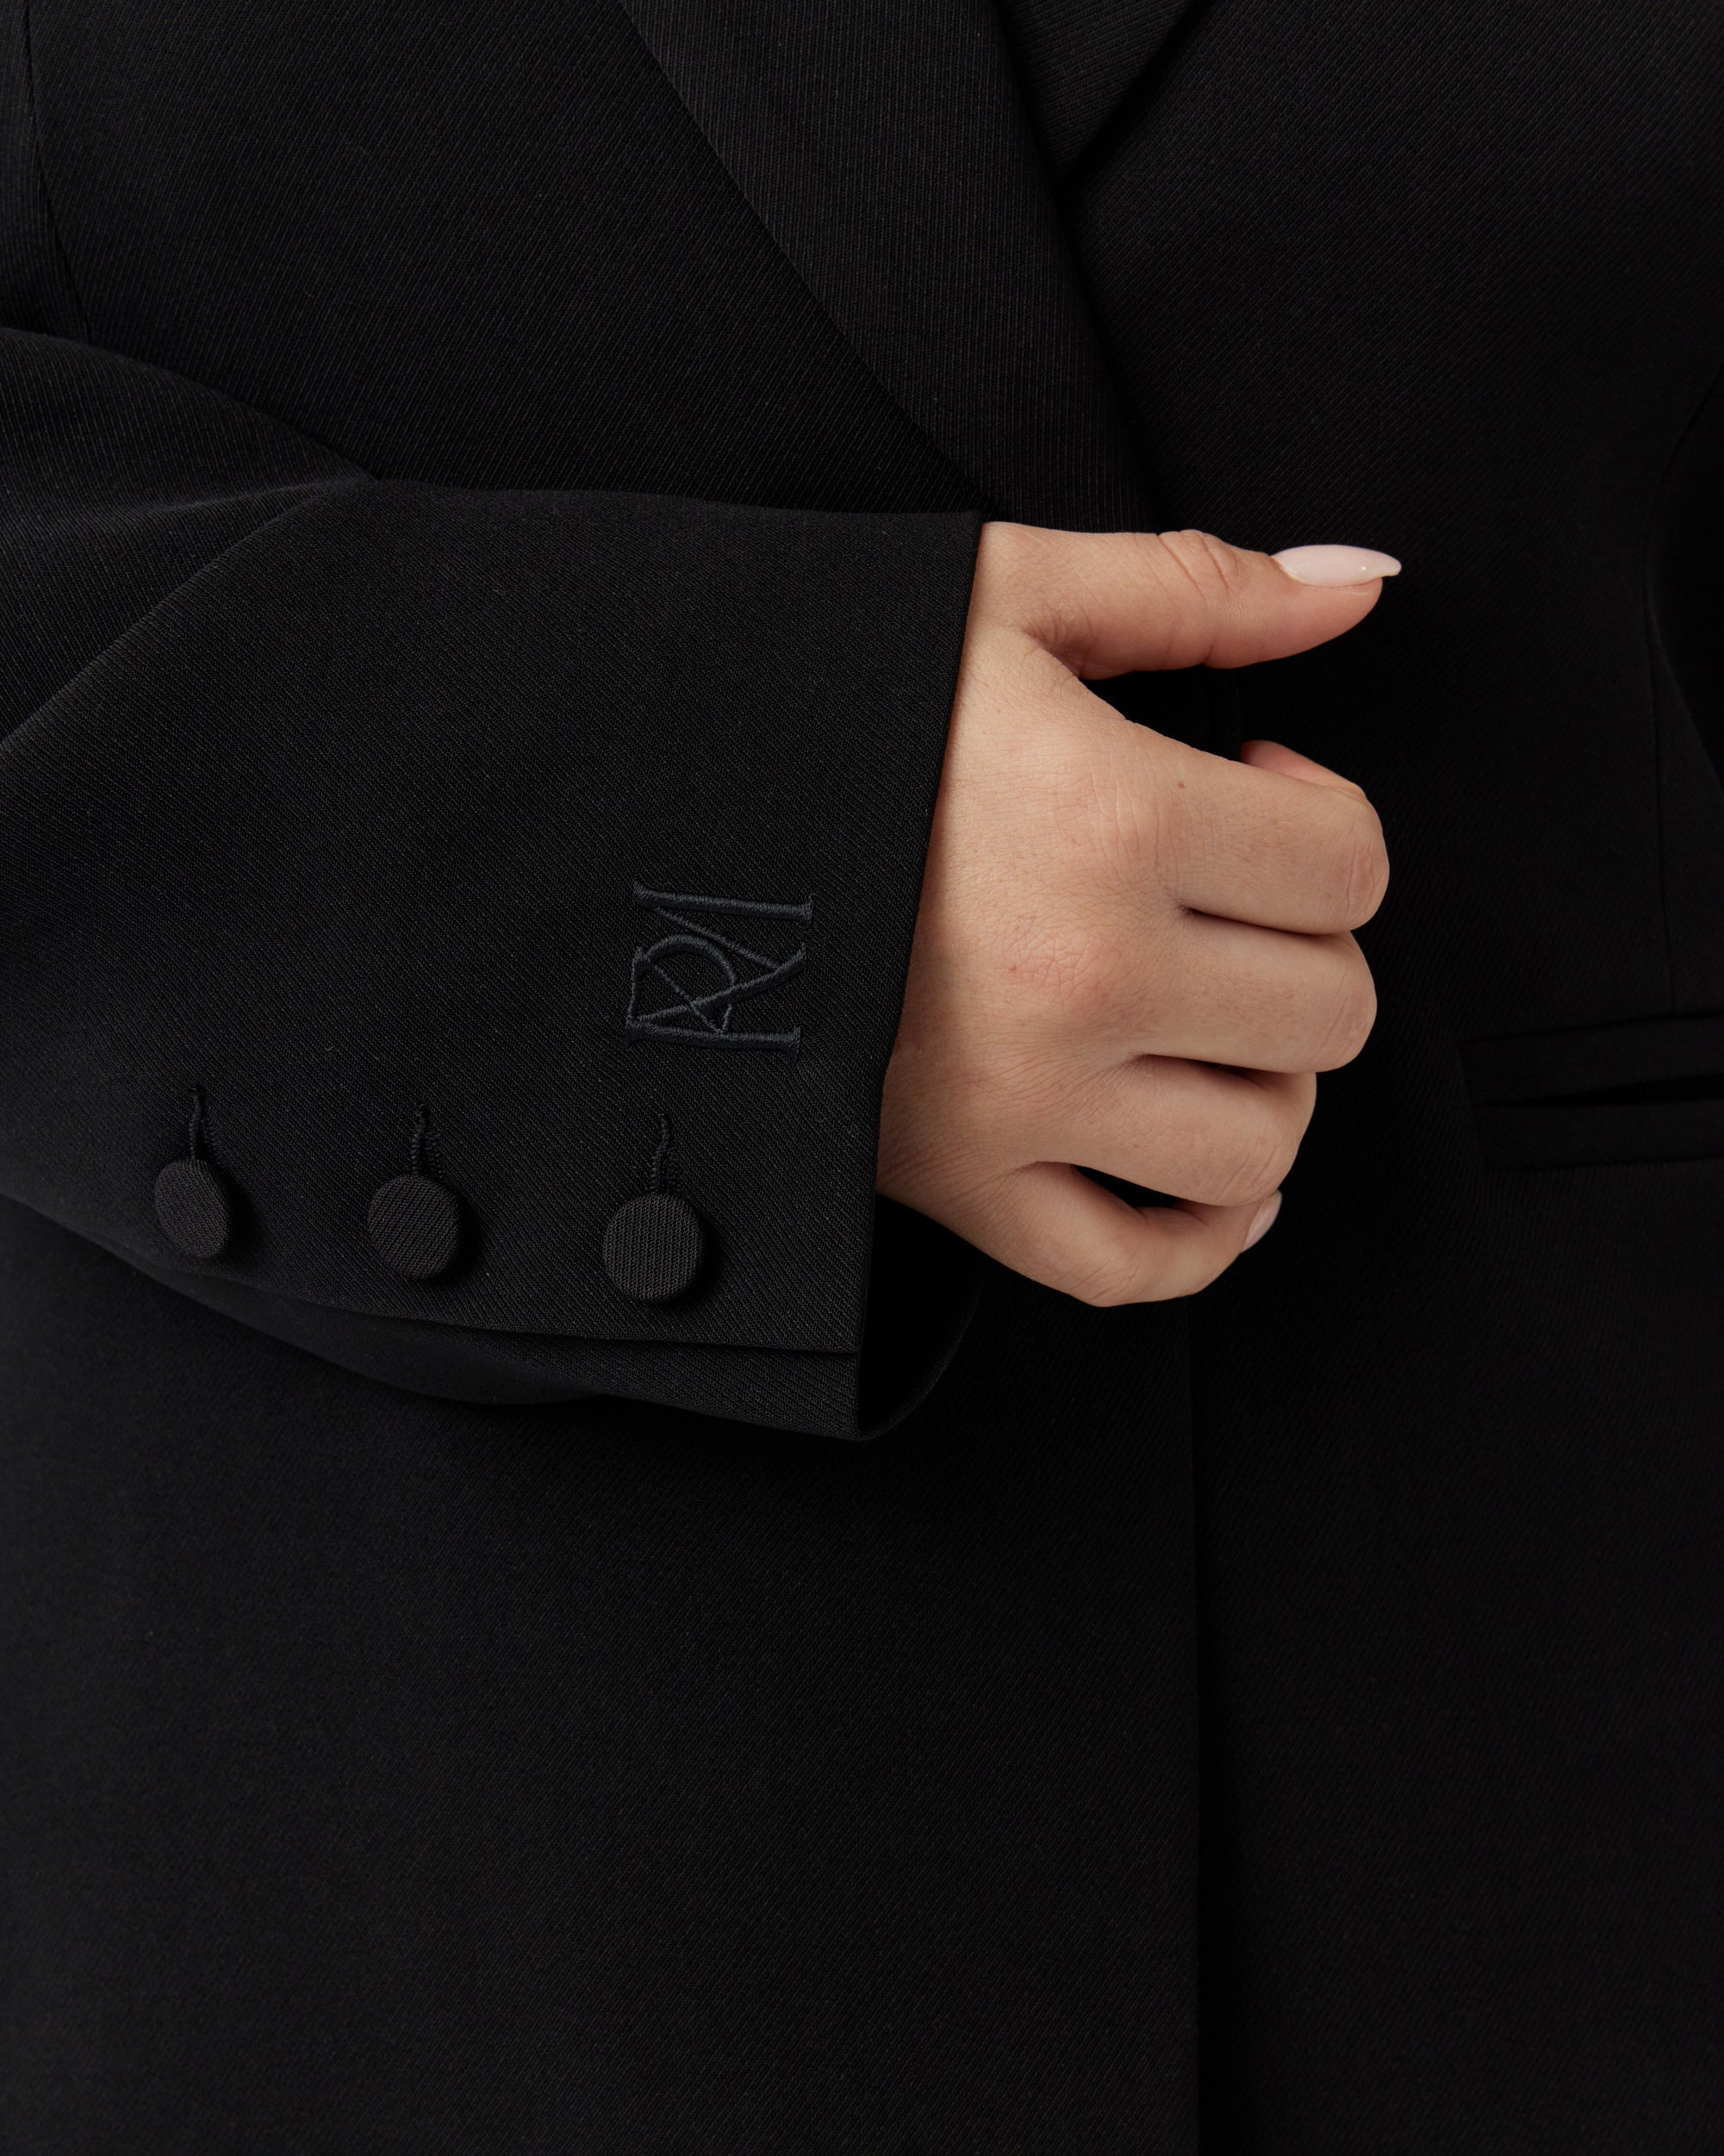 Close up image of an embroidered brand mark on the right hand sleeve of a minimalistic black blazer